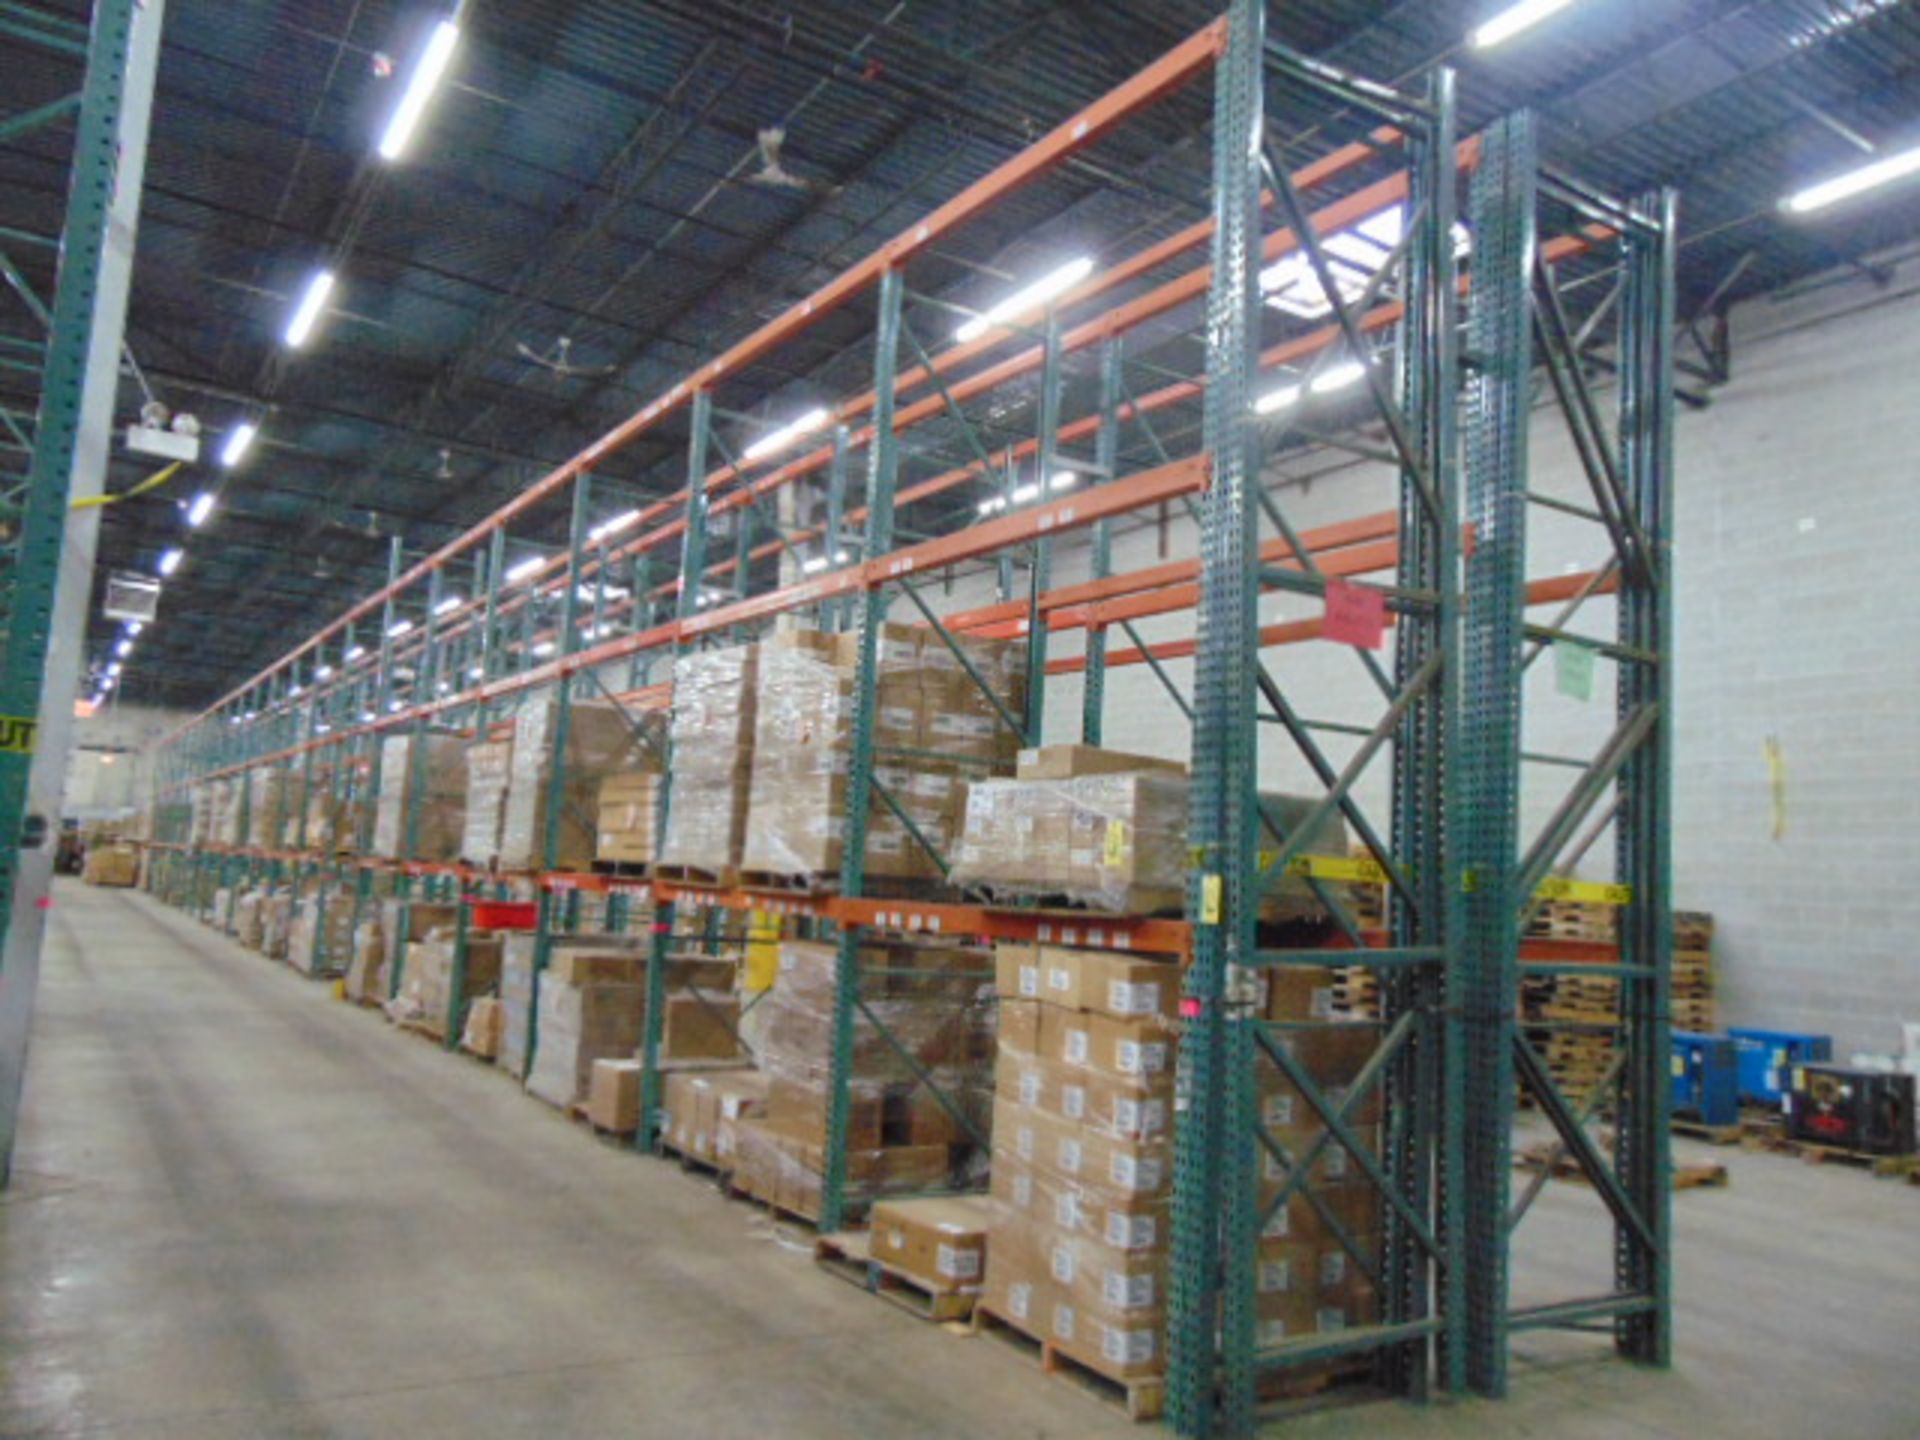 LOT OF PALLET RACK SECTIONS (42), 16' ht. x 92"W. x 42" dp. - Image 2 of 3